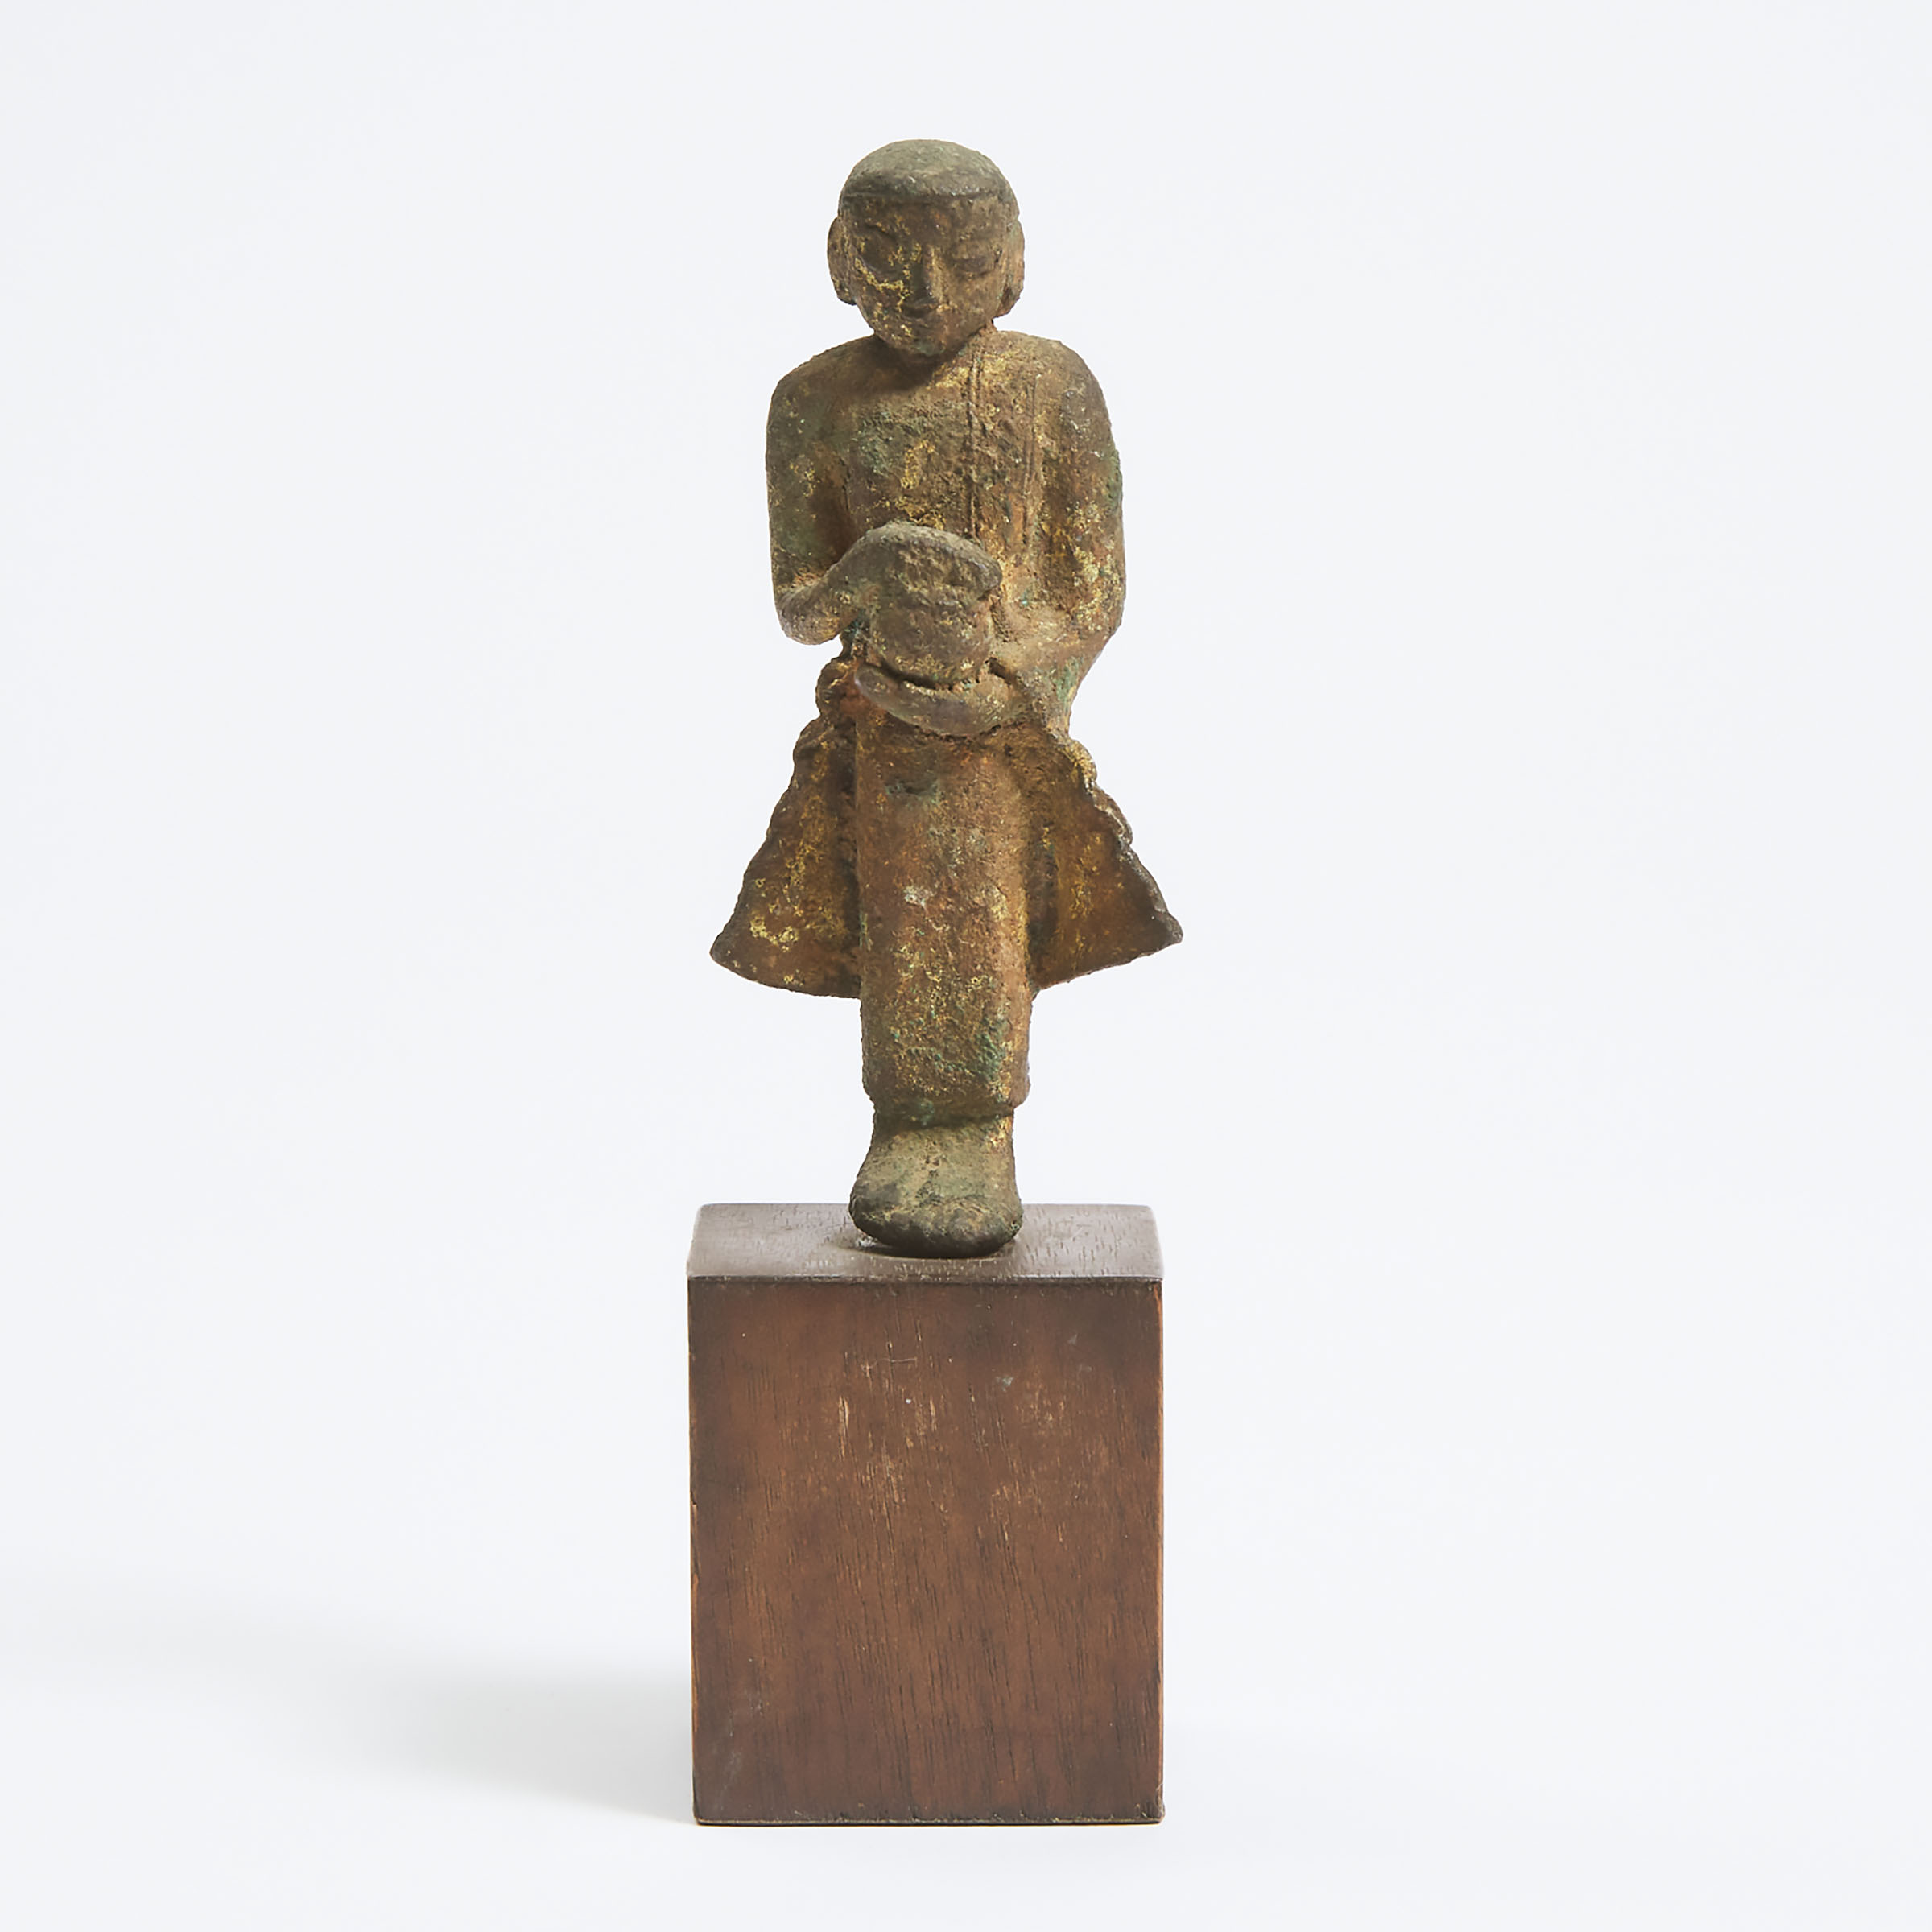 A Small Burmese Gilt Bronze Figure of a Monk Holding a Vase, 14th Century or Later